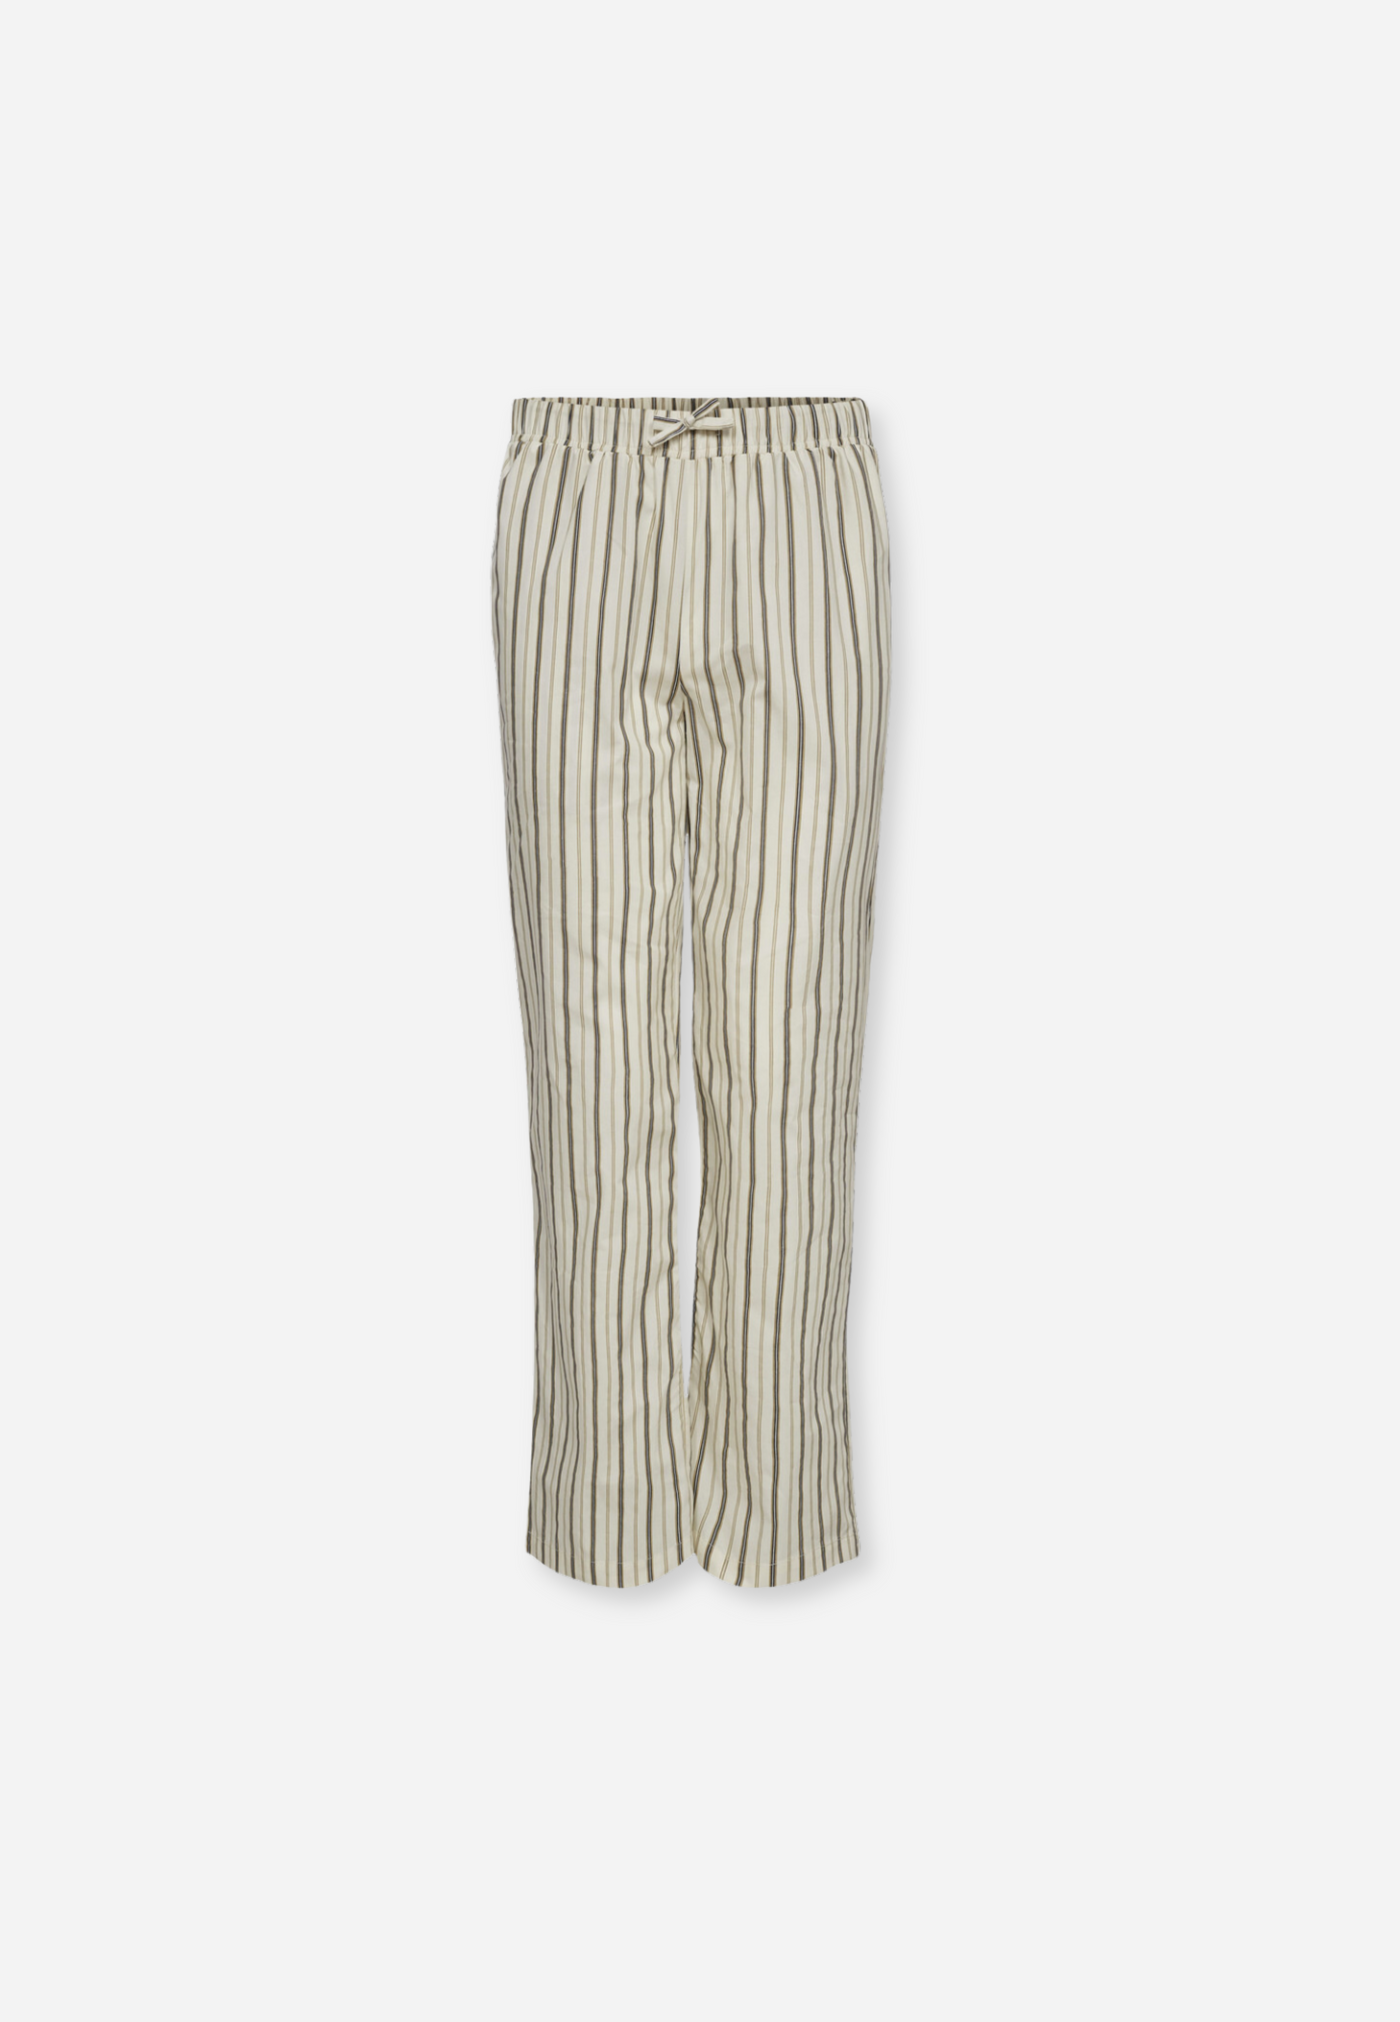 TROUSERS - OFF WHITE STRIPED